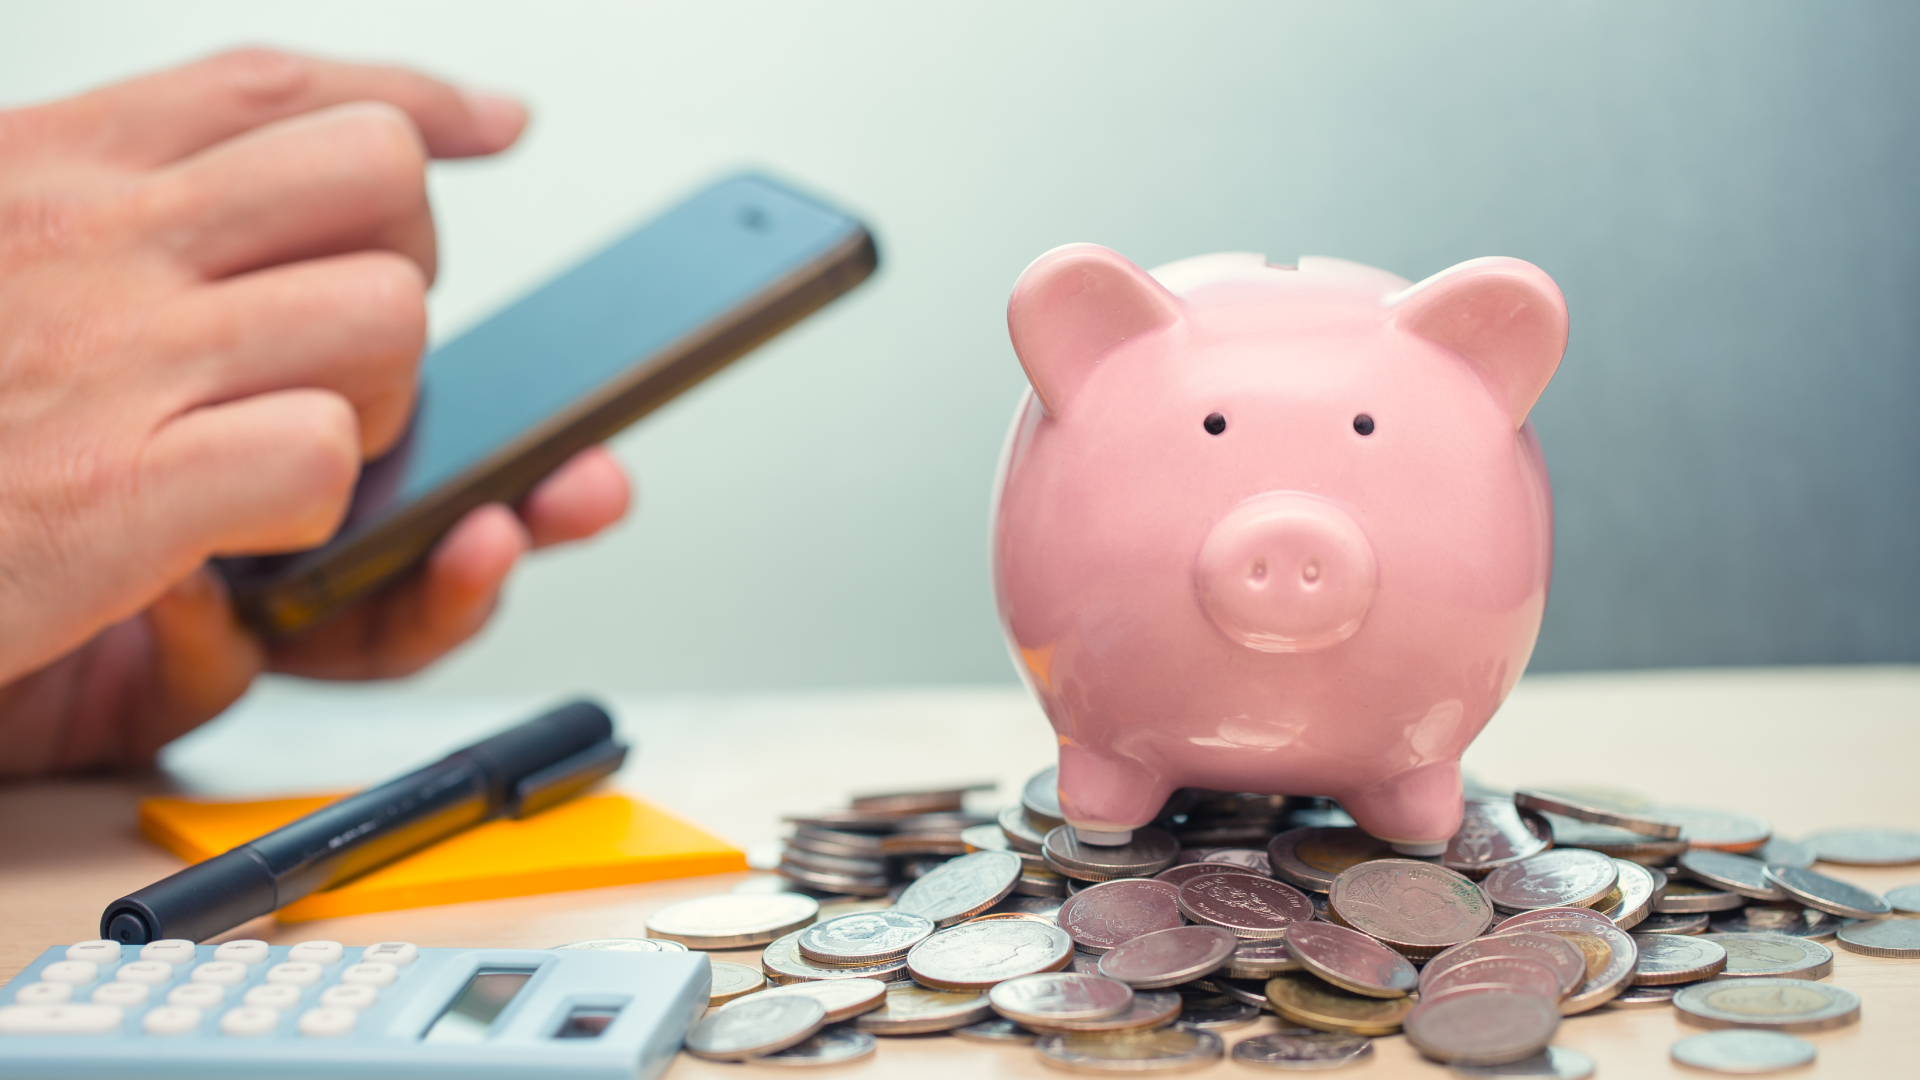 a person types on smartphone next to a piggy bank, which sits on top of a pile of coins, to represent a budget